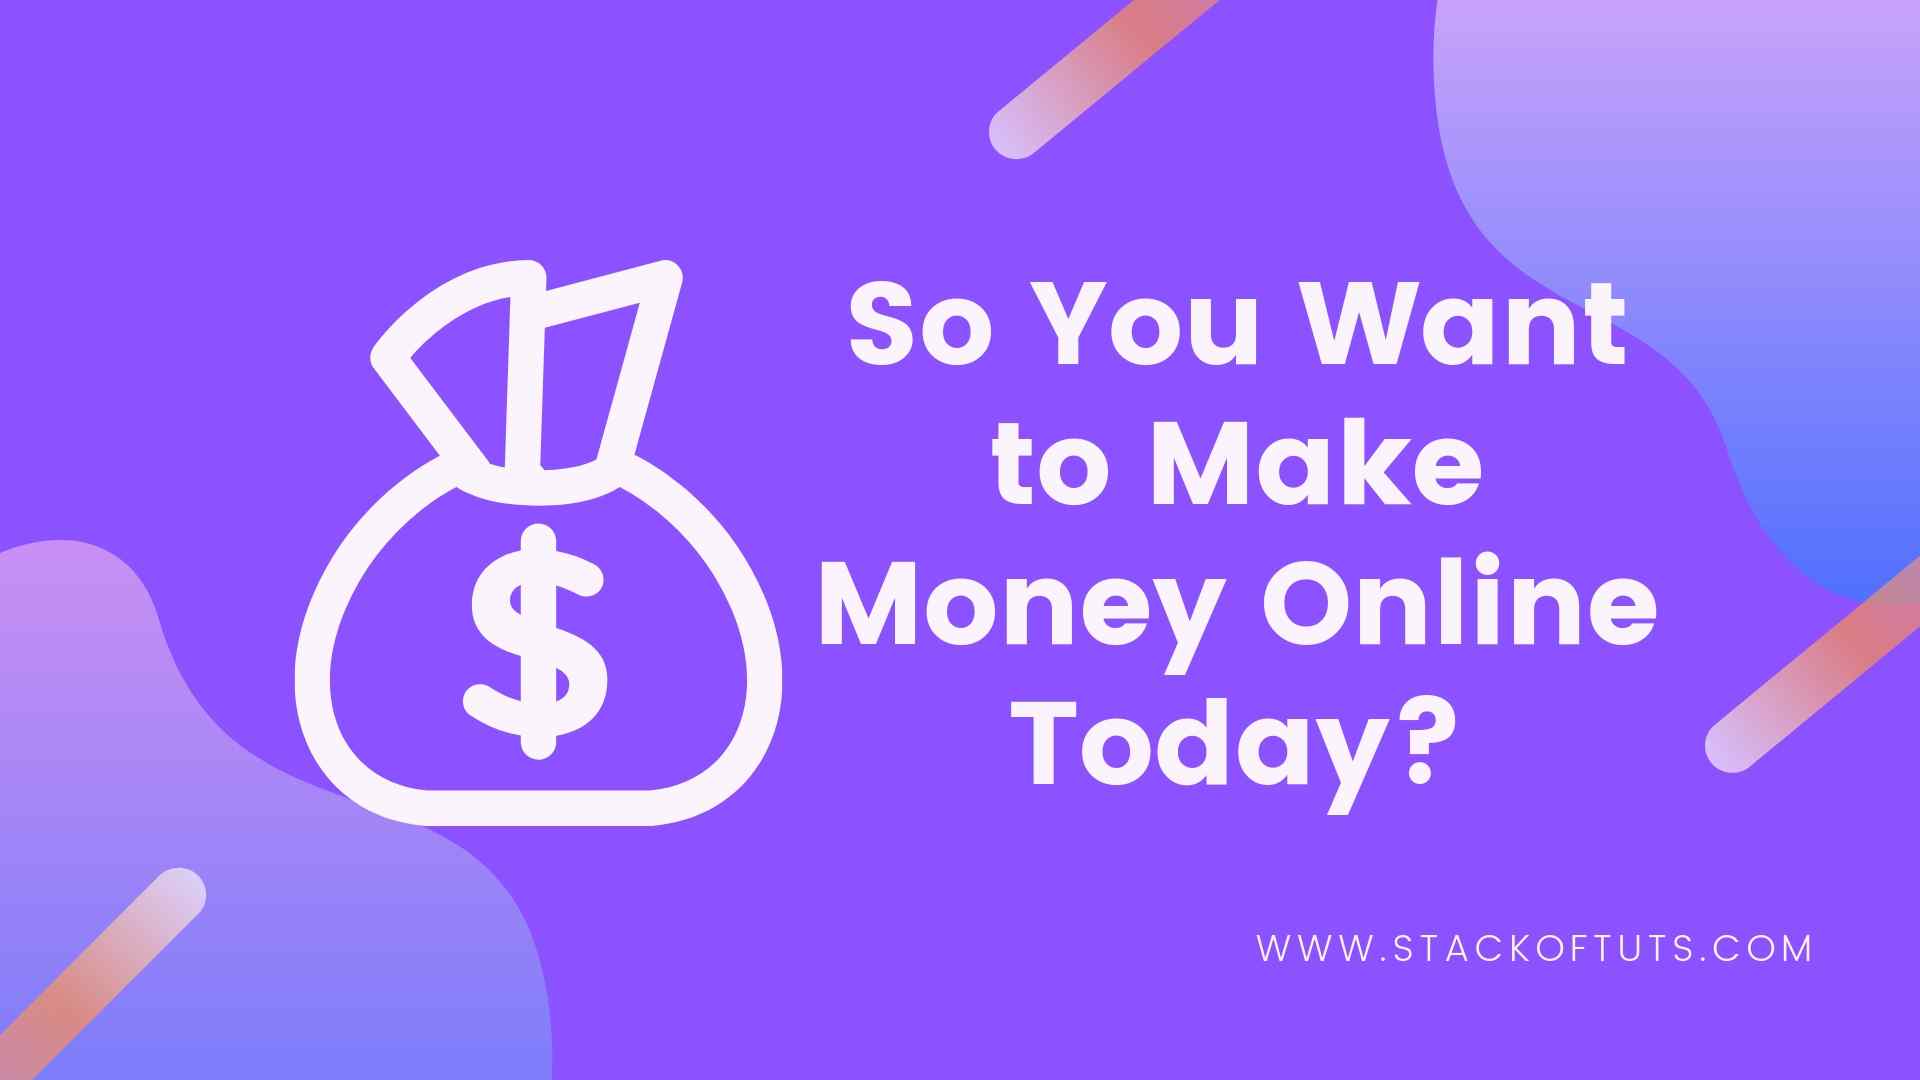 So You Want to Make Money Online Today?